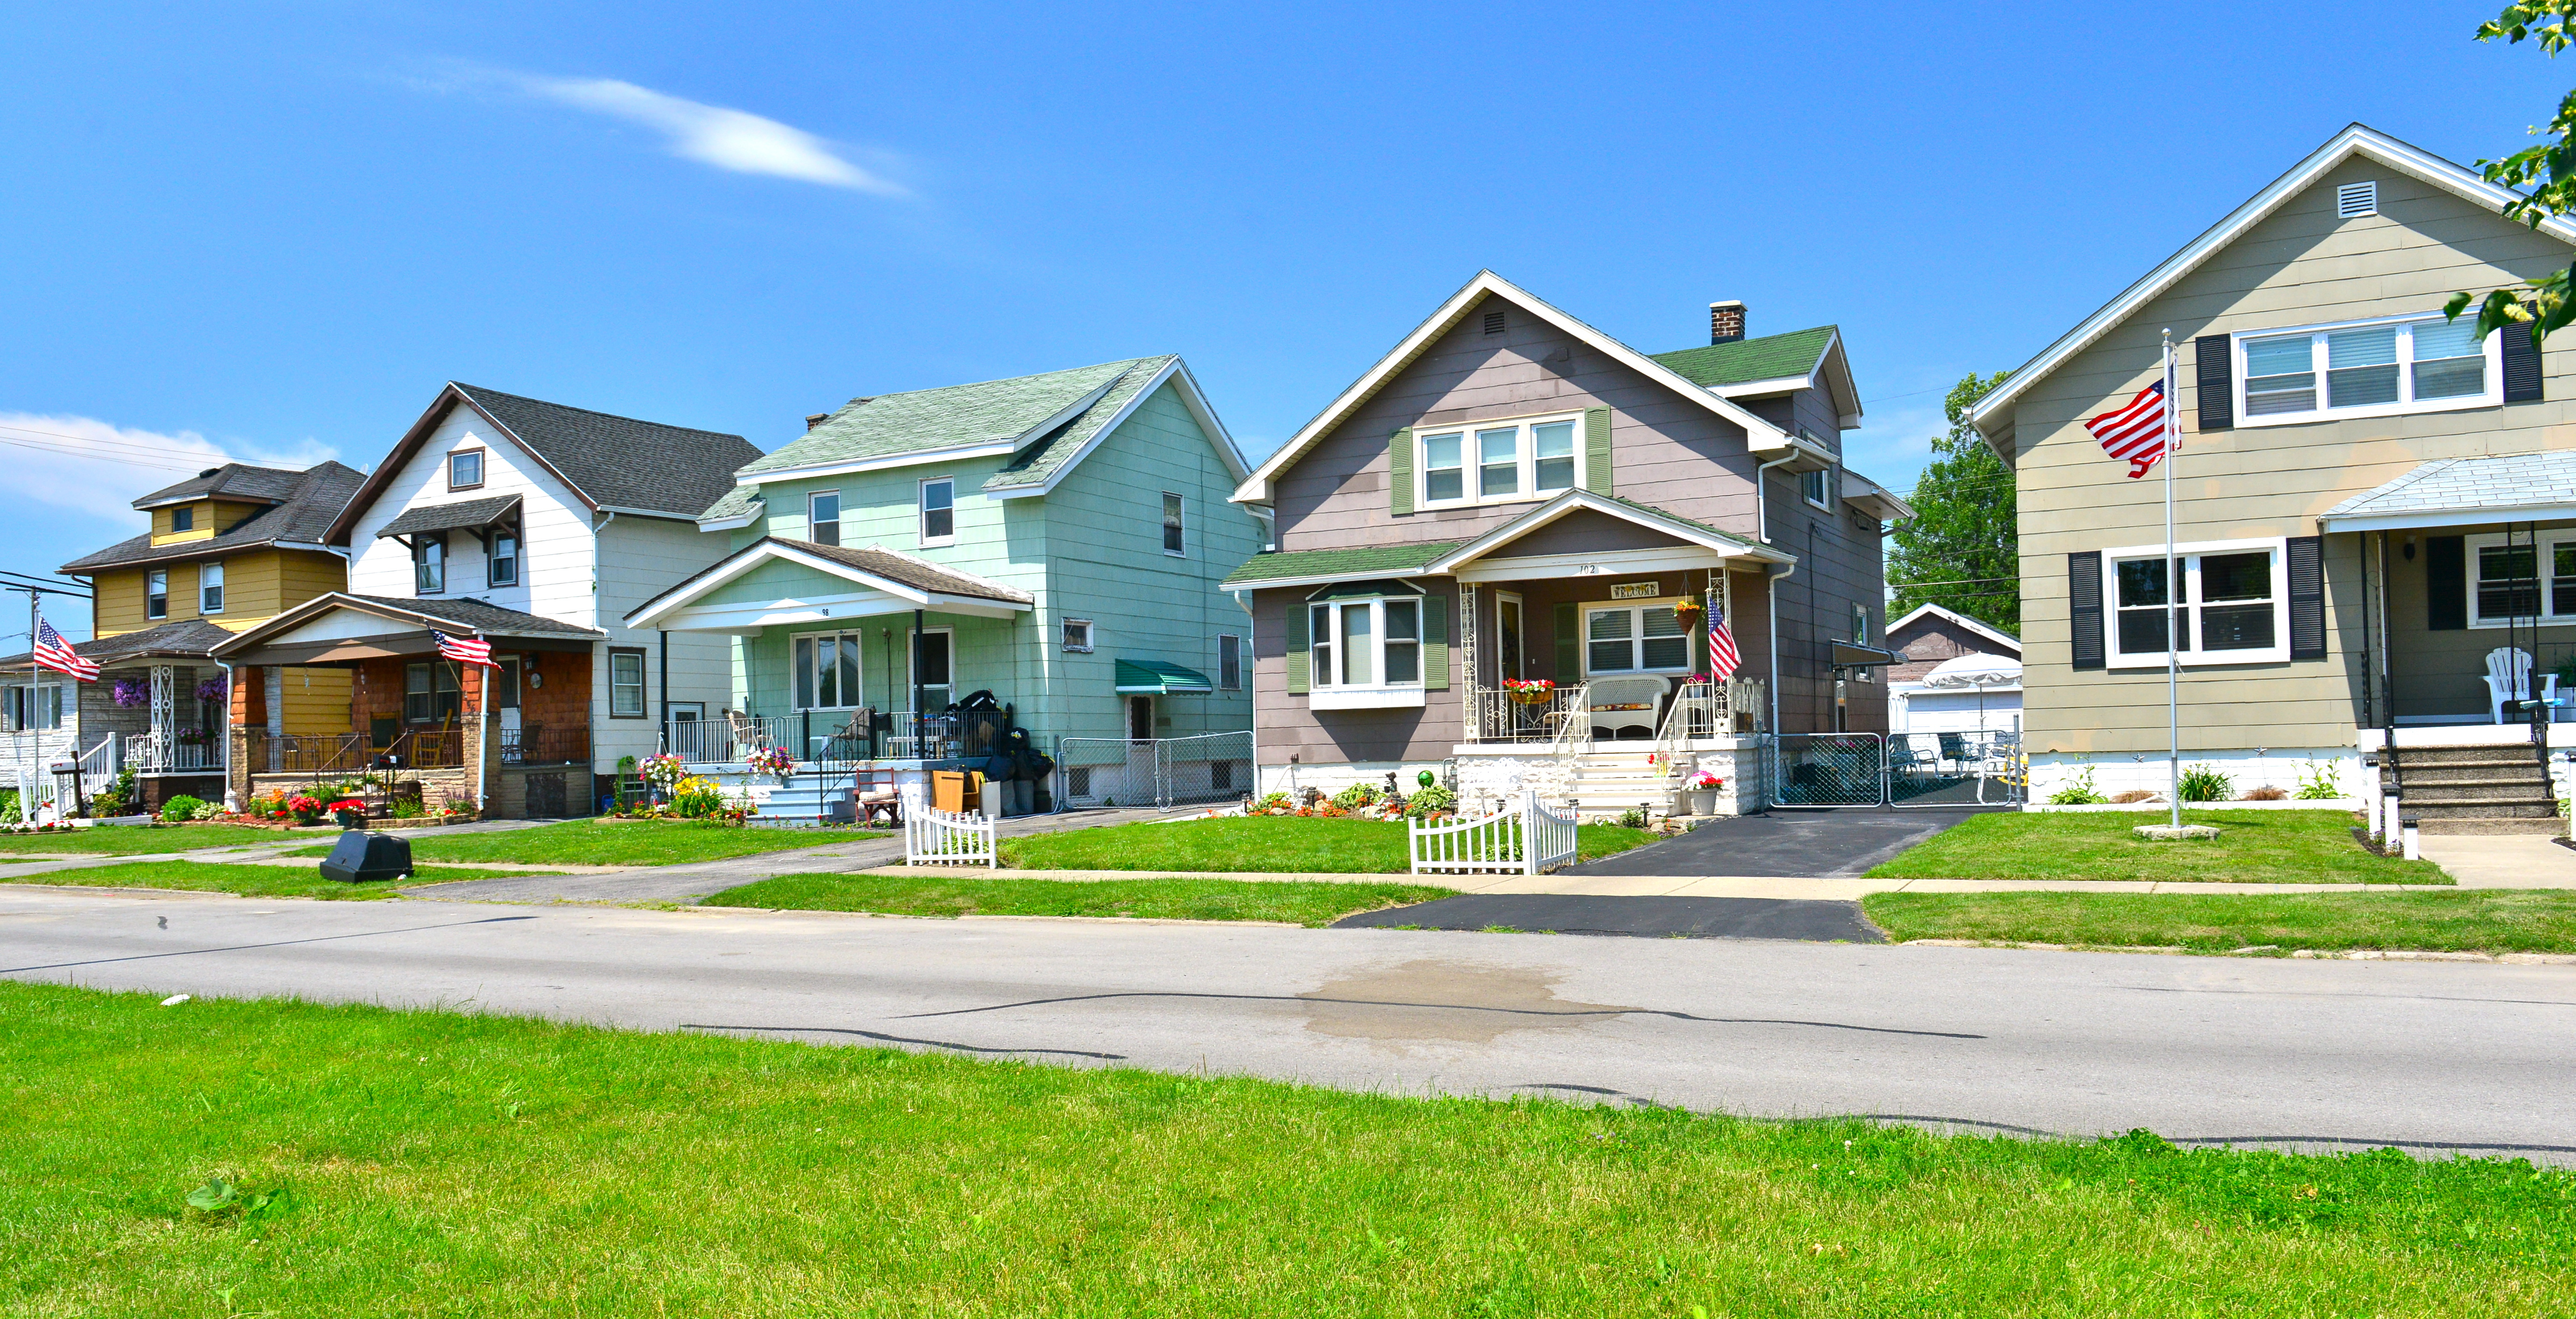 A row of houses in Buffalo, New York | Source: Shutterstock